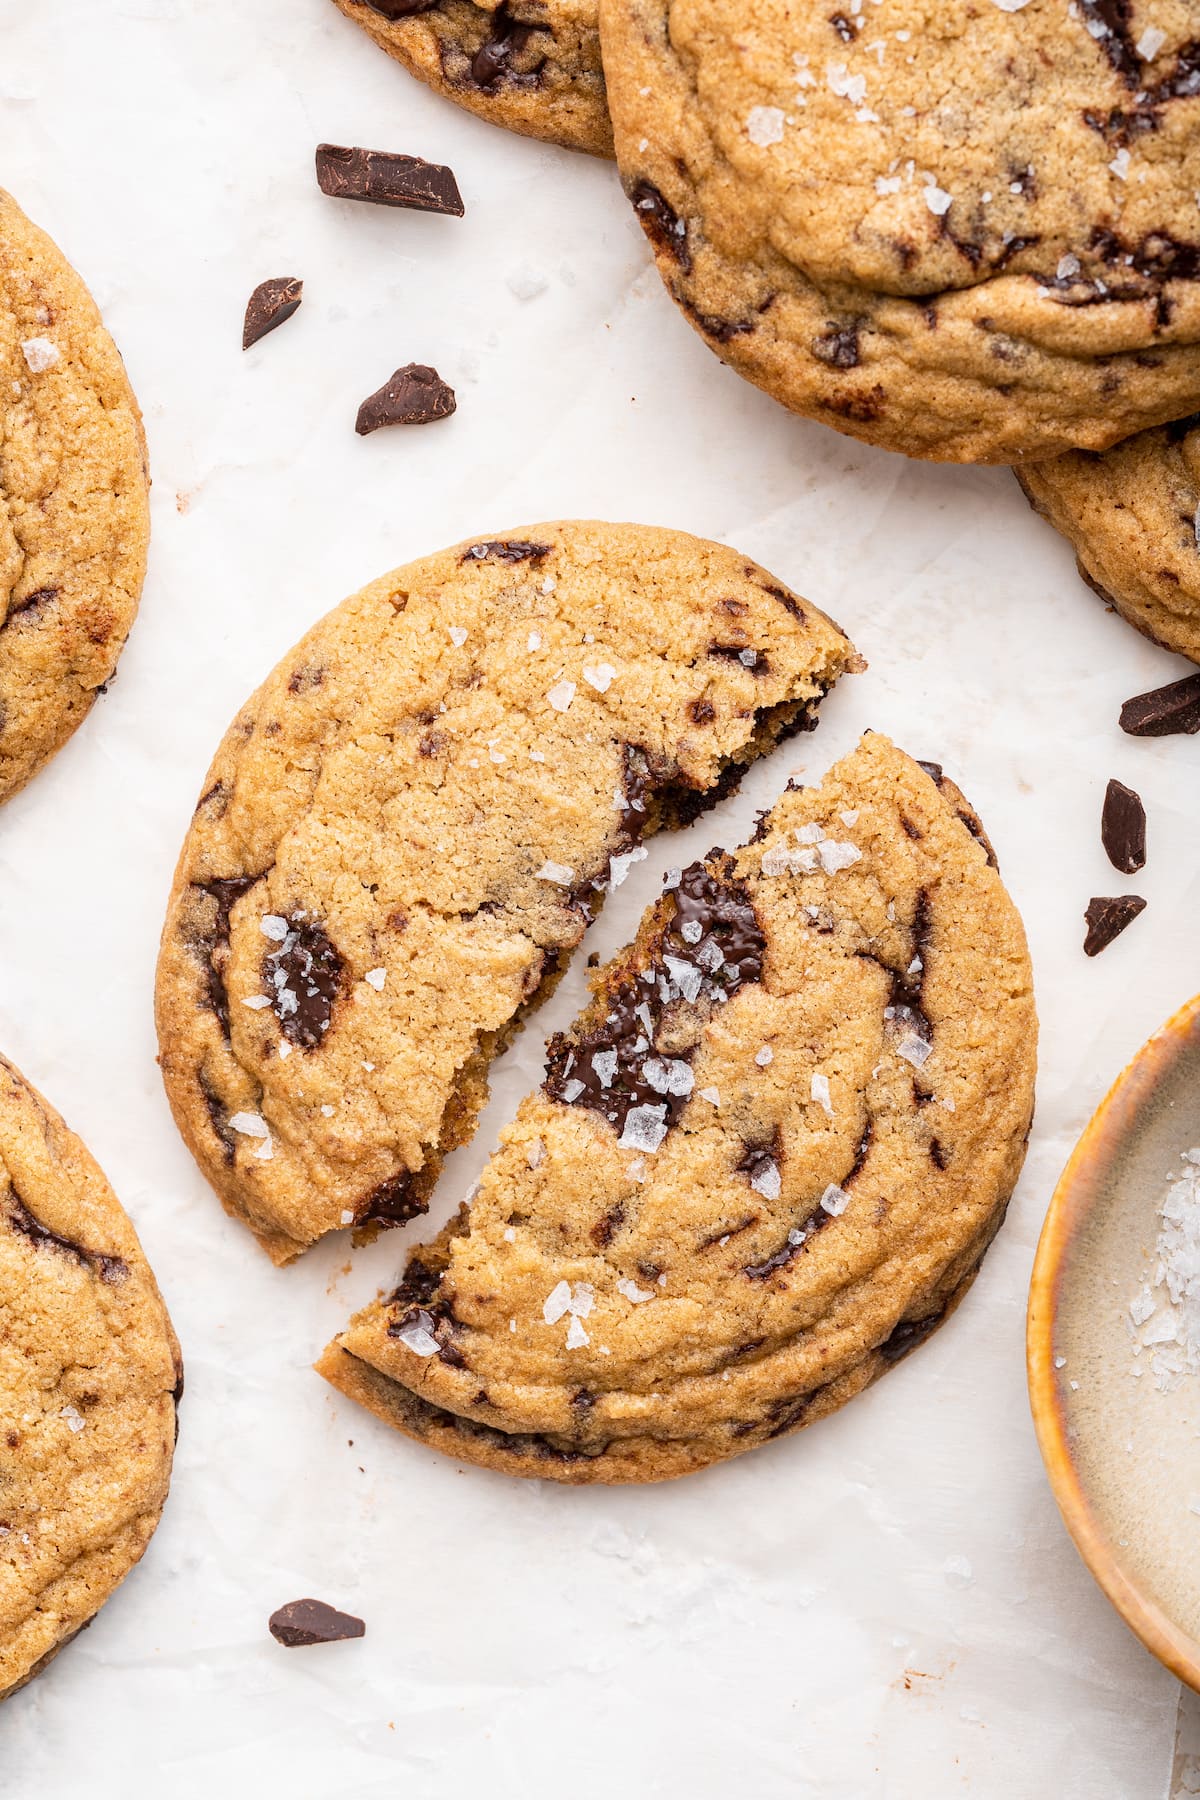 A brown butter chocolate chip cookie split in half.